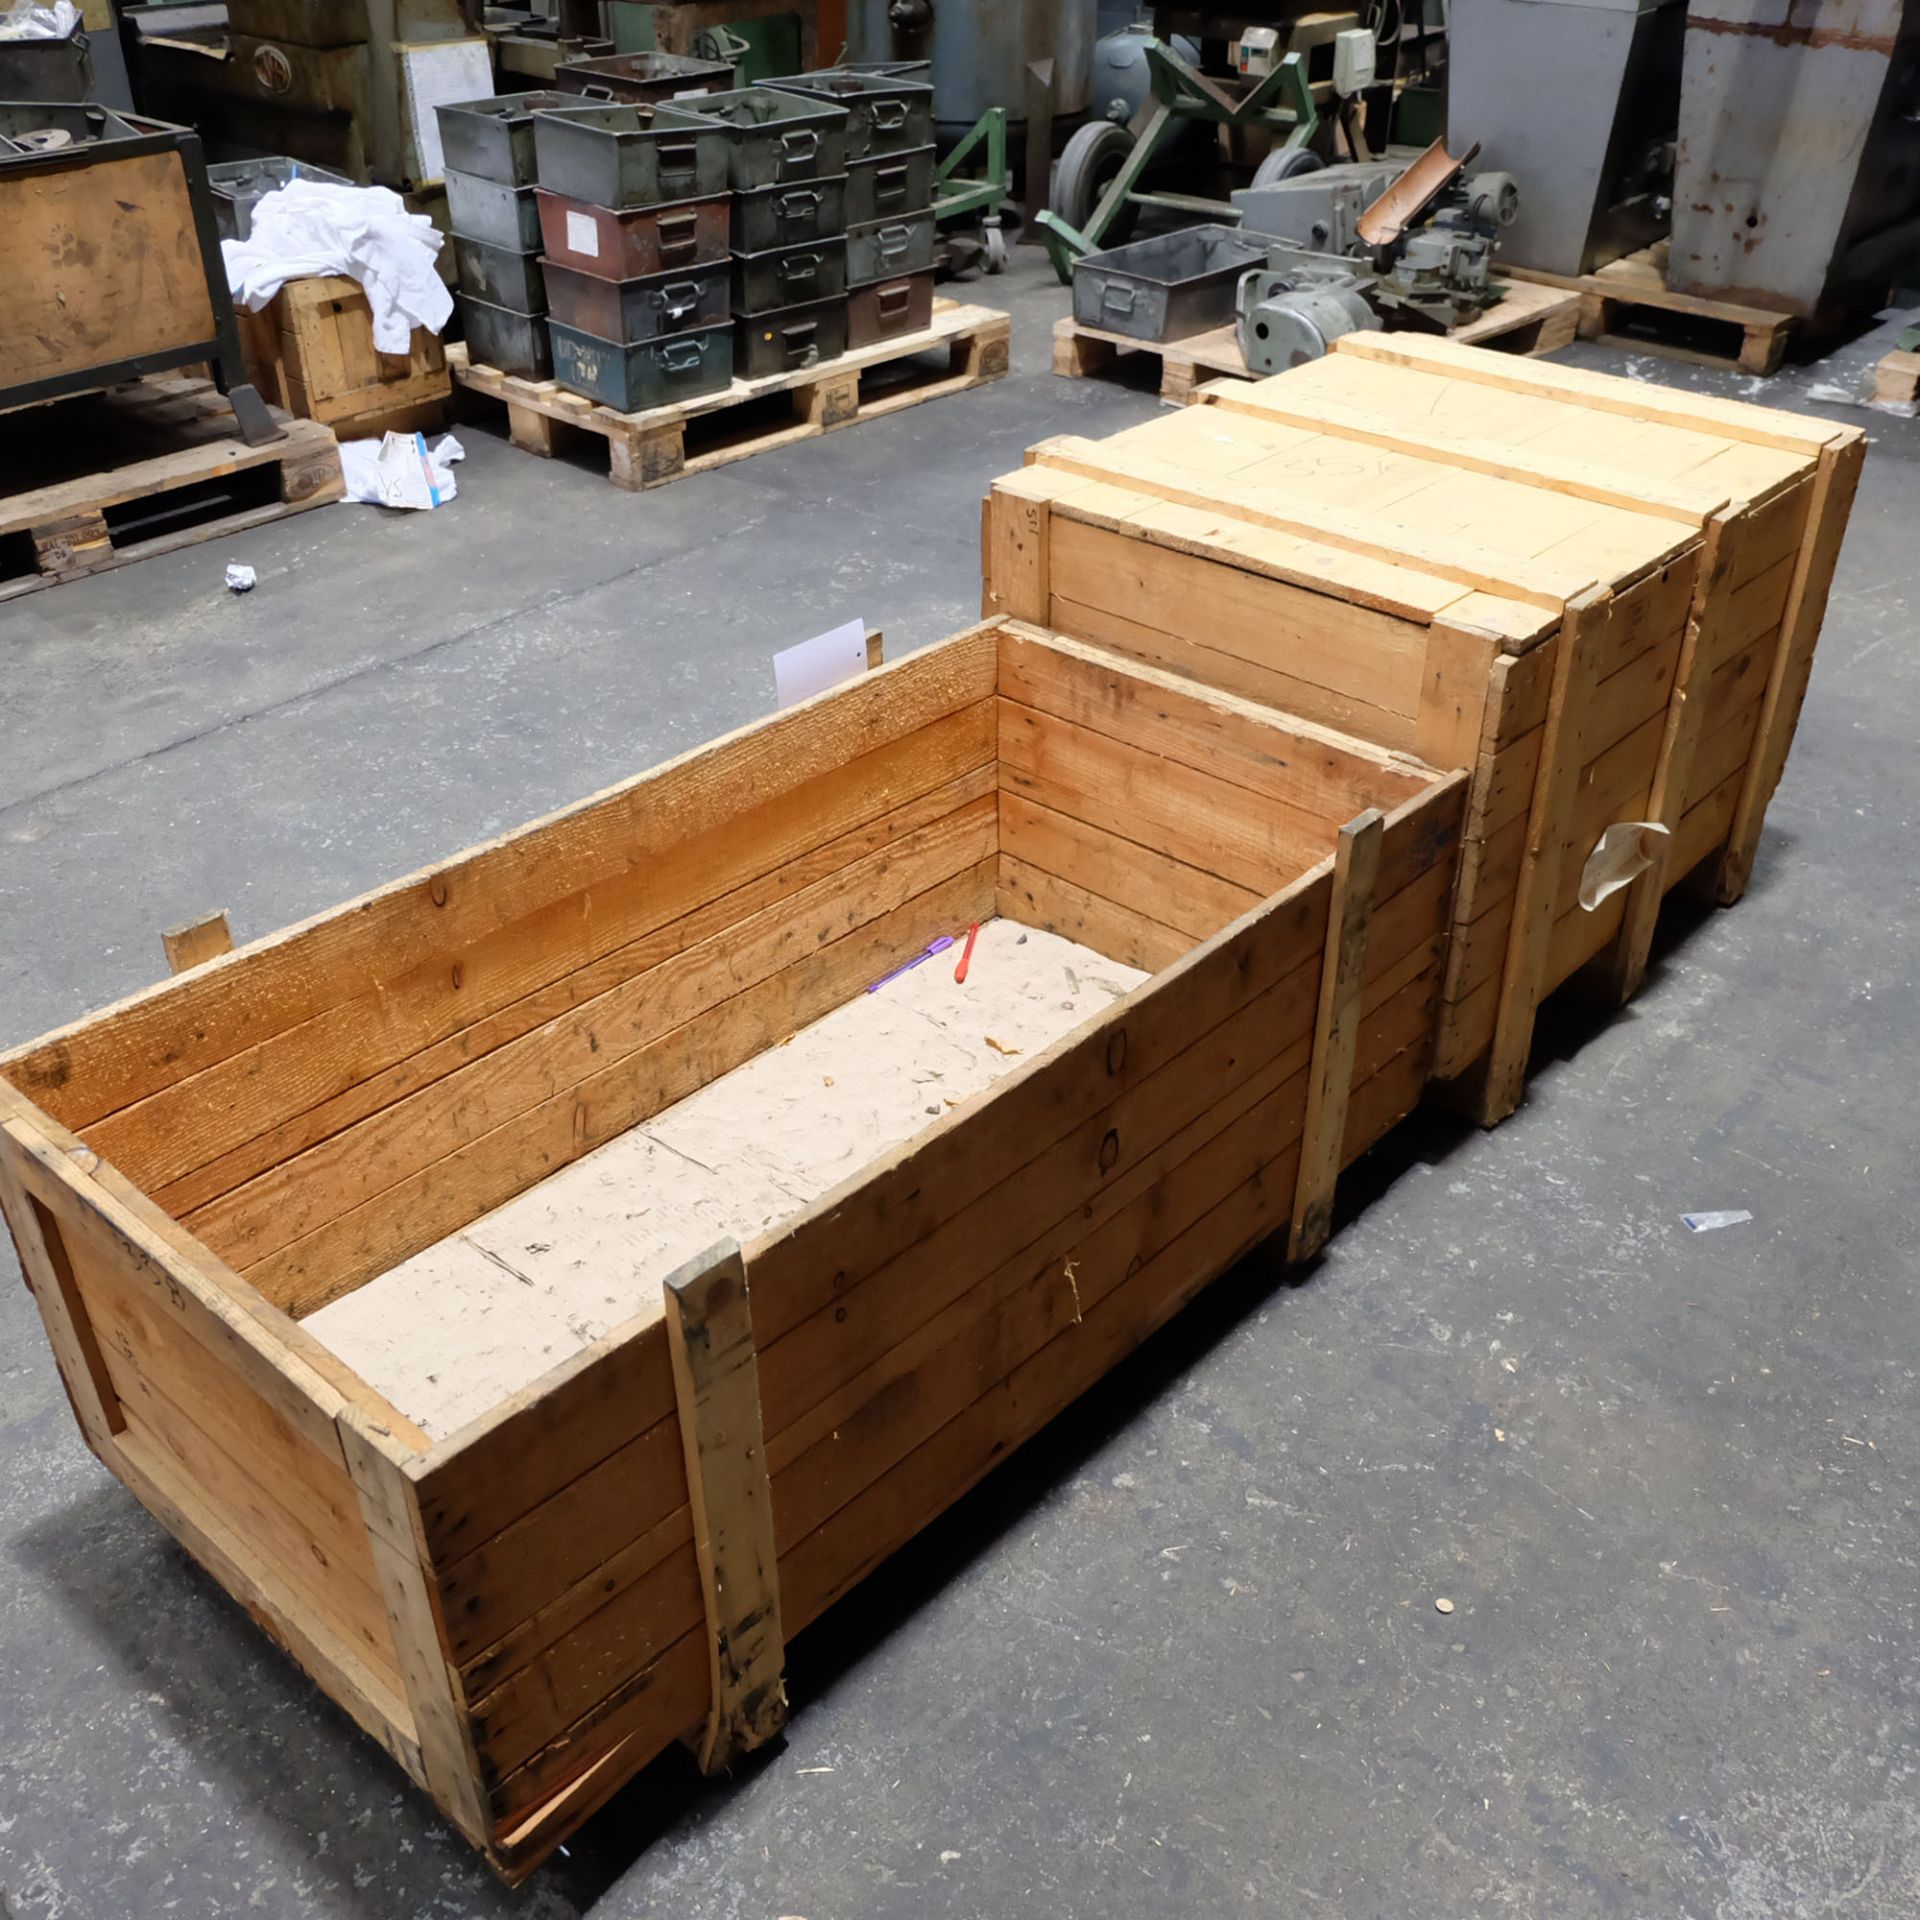 2 x Timber Boxes 35" x 26" x 20" 48" x 24" x 16" - Image 4 of 4